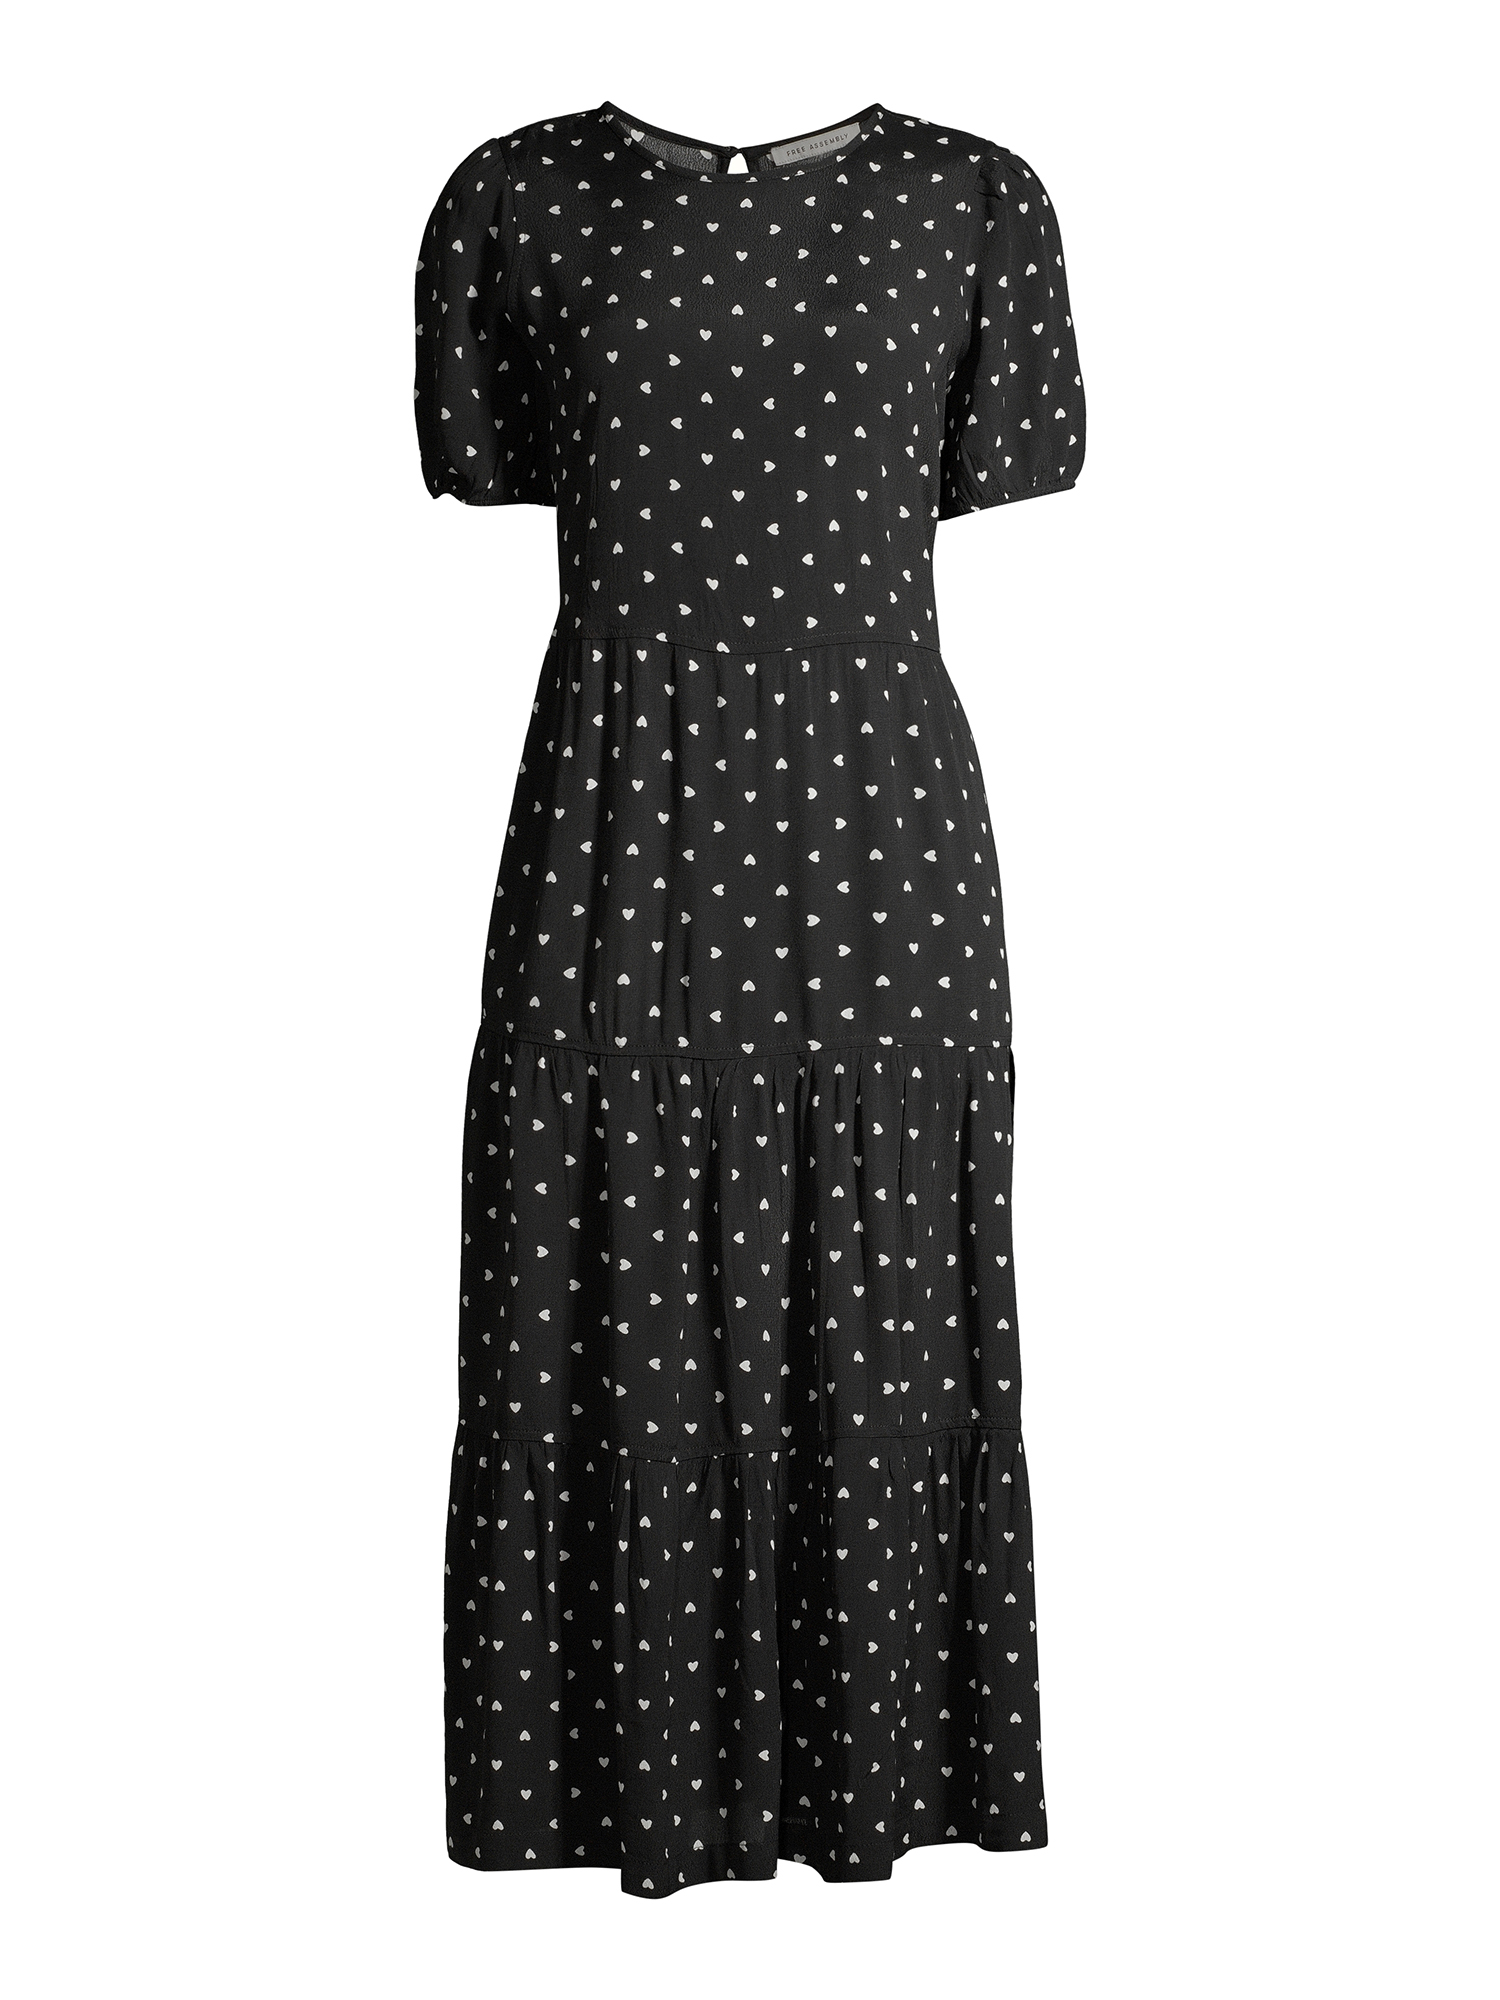 Free Assembly Women's Short Sleeve Tiered Maxi Dress - image 5 of 6